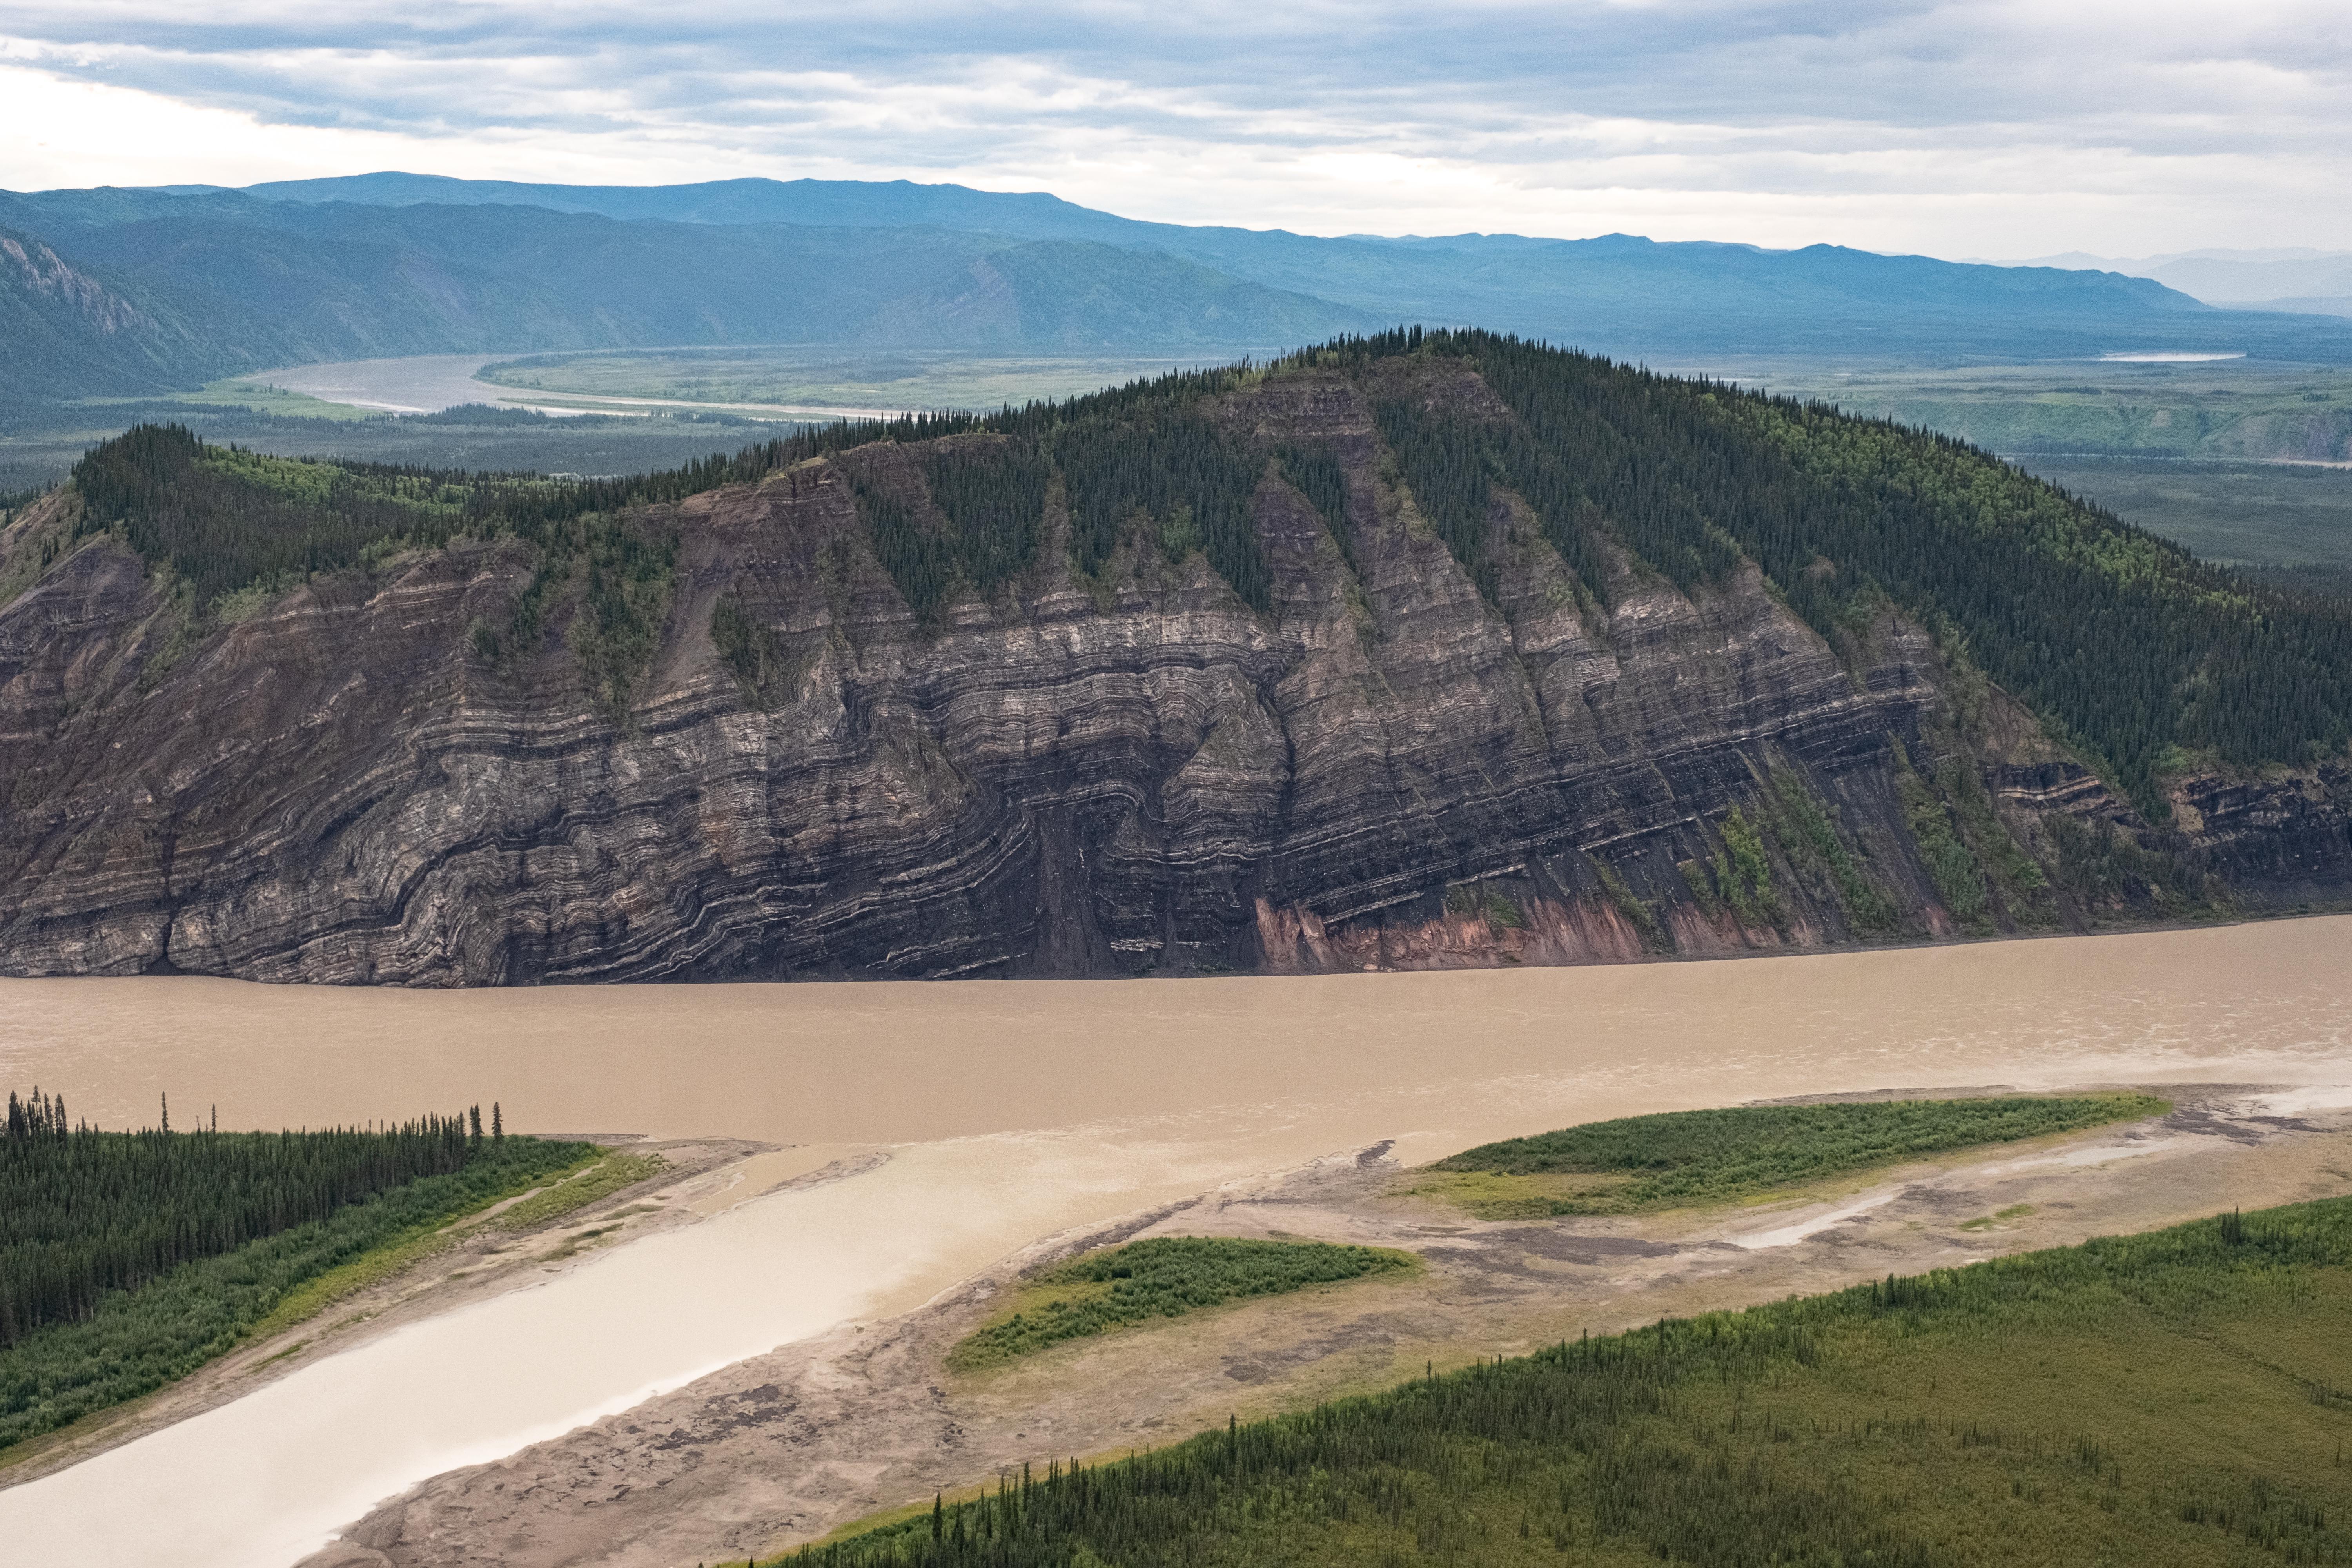 Calico Bluff and the Yukon River